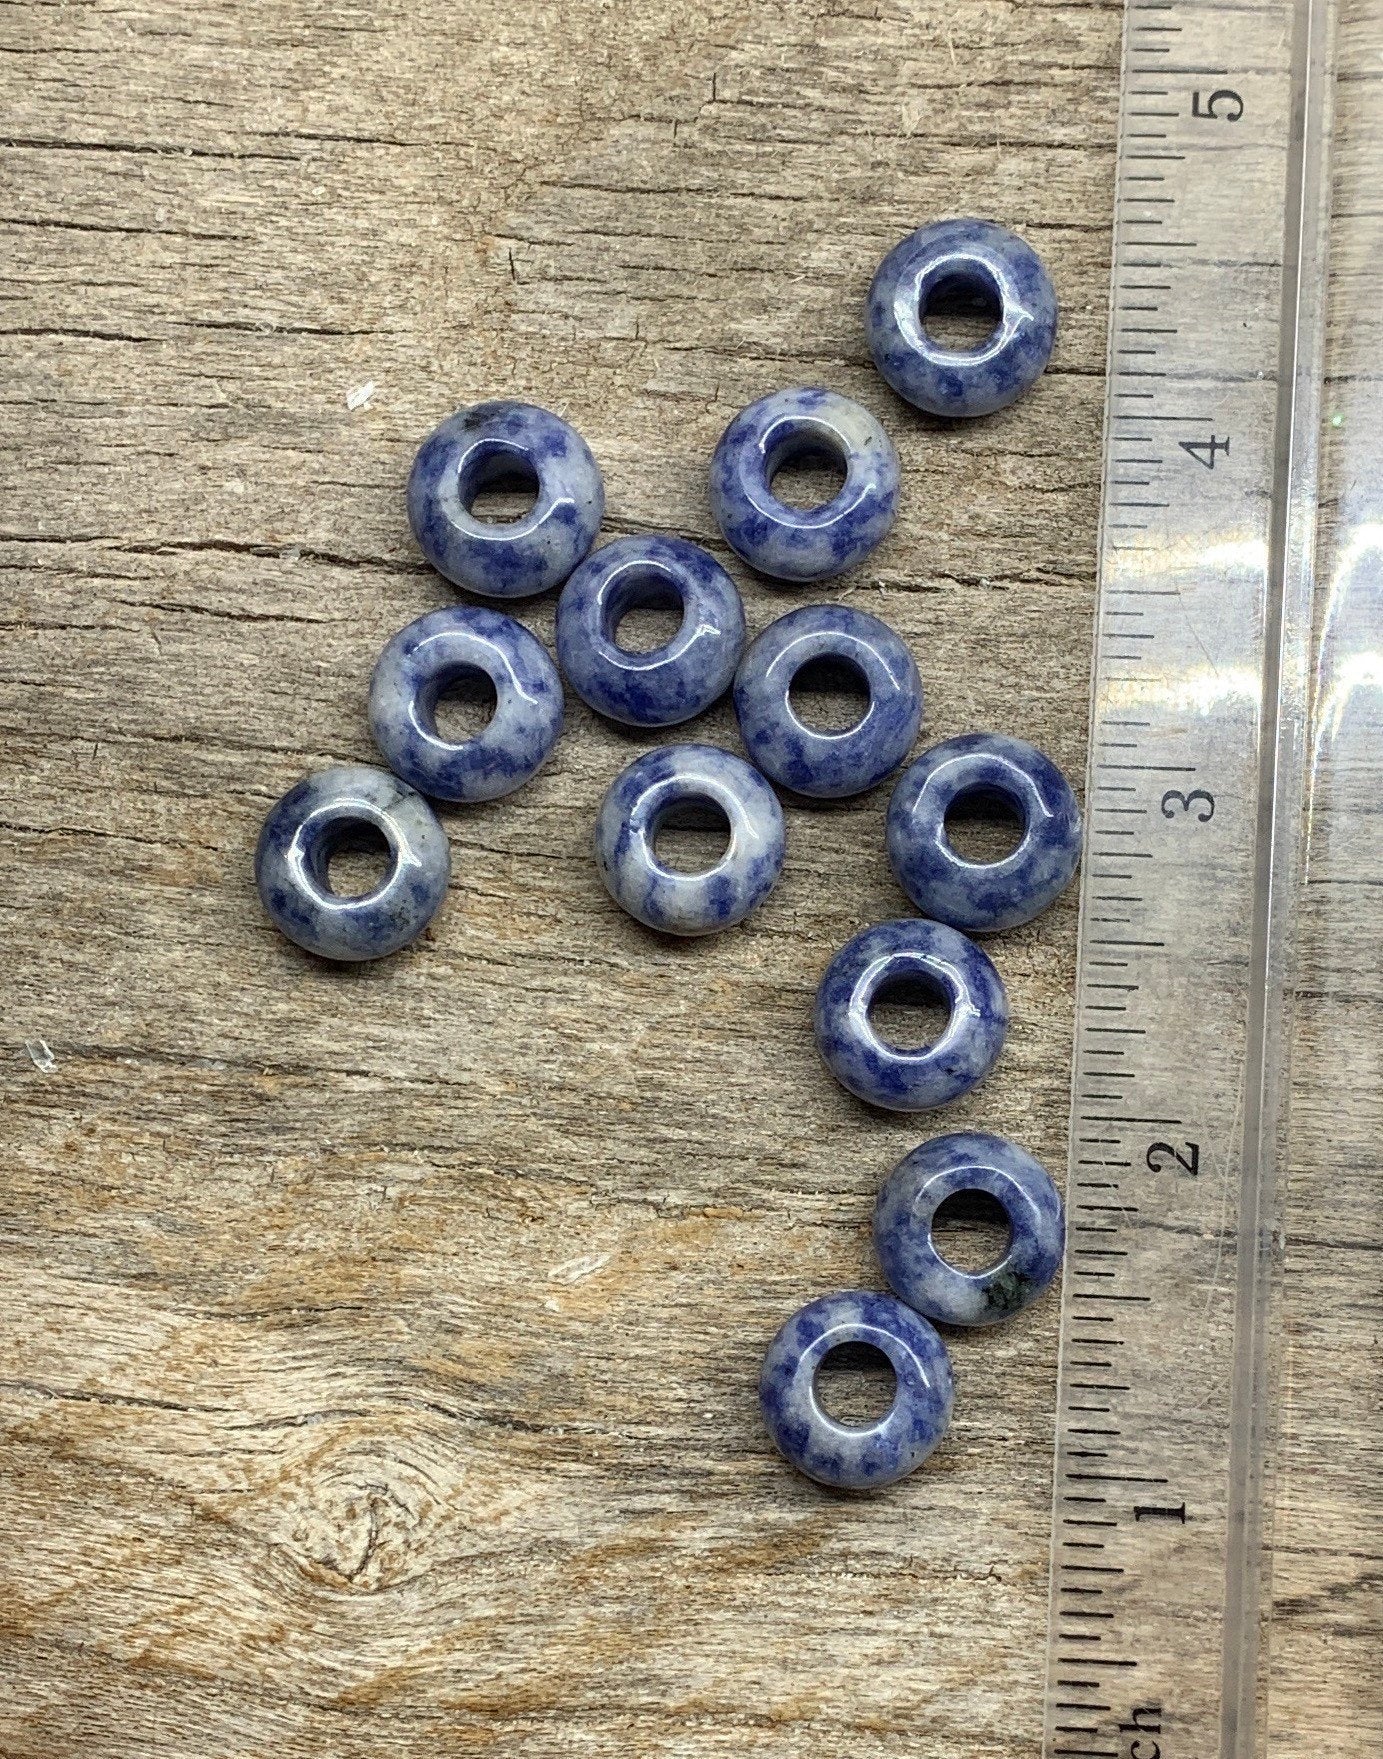 "Close-up of vibrant 14mm Sodalite beads, showcasing their rich blue hues and natural patterns, positioned next to a ruler to show size